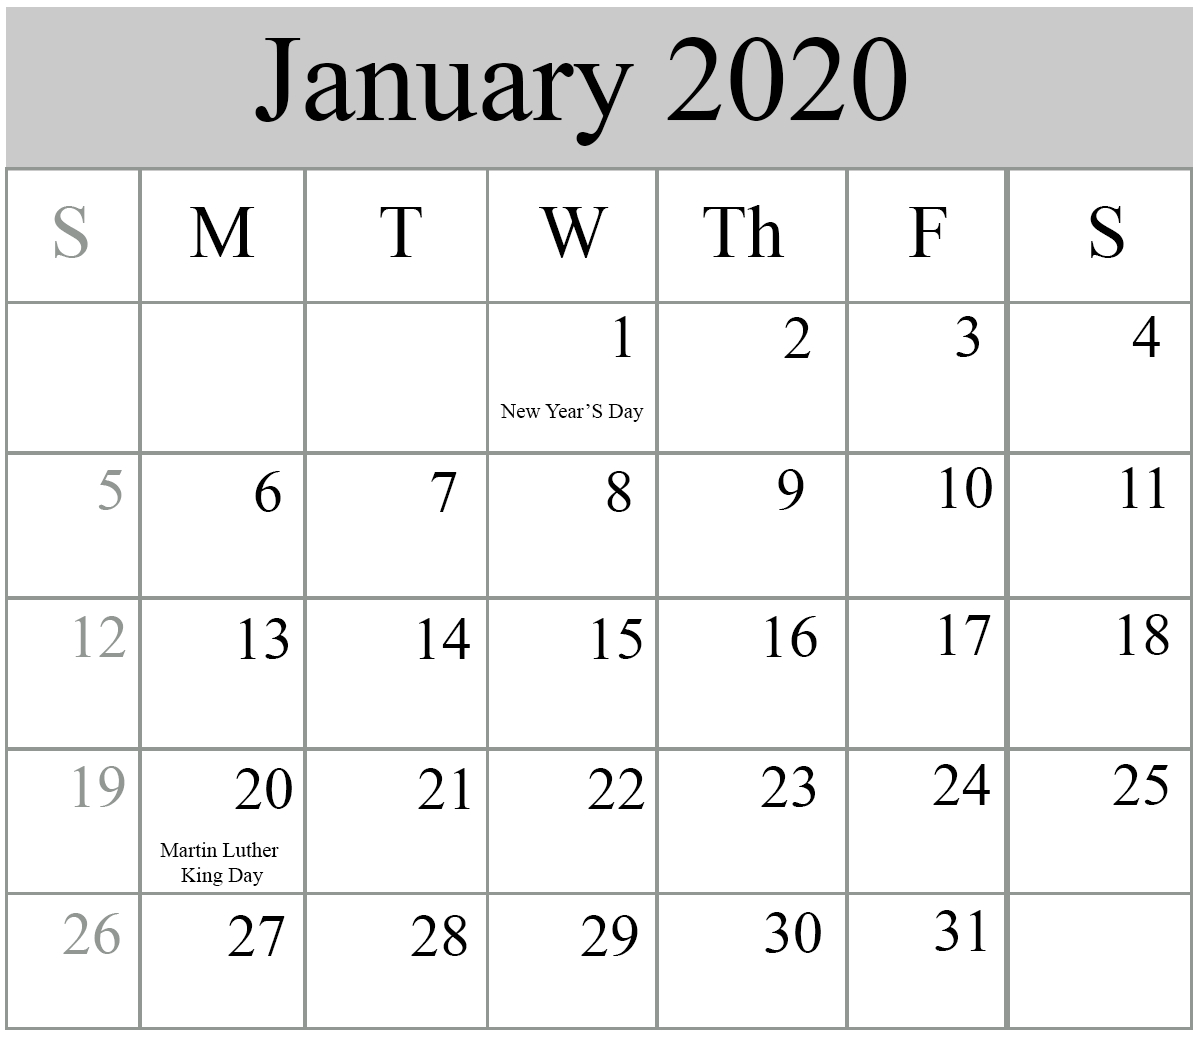 January 2020 Calendar With American Holidays And Events